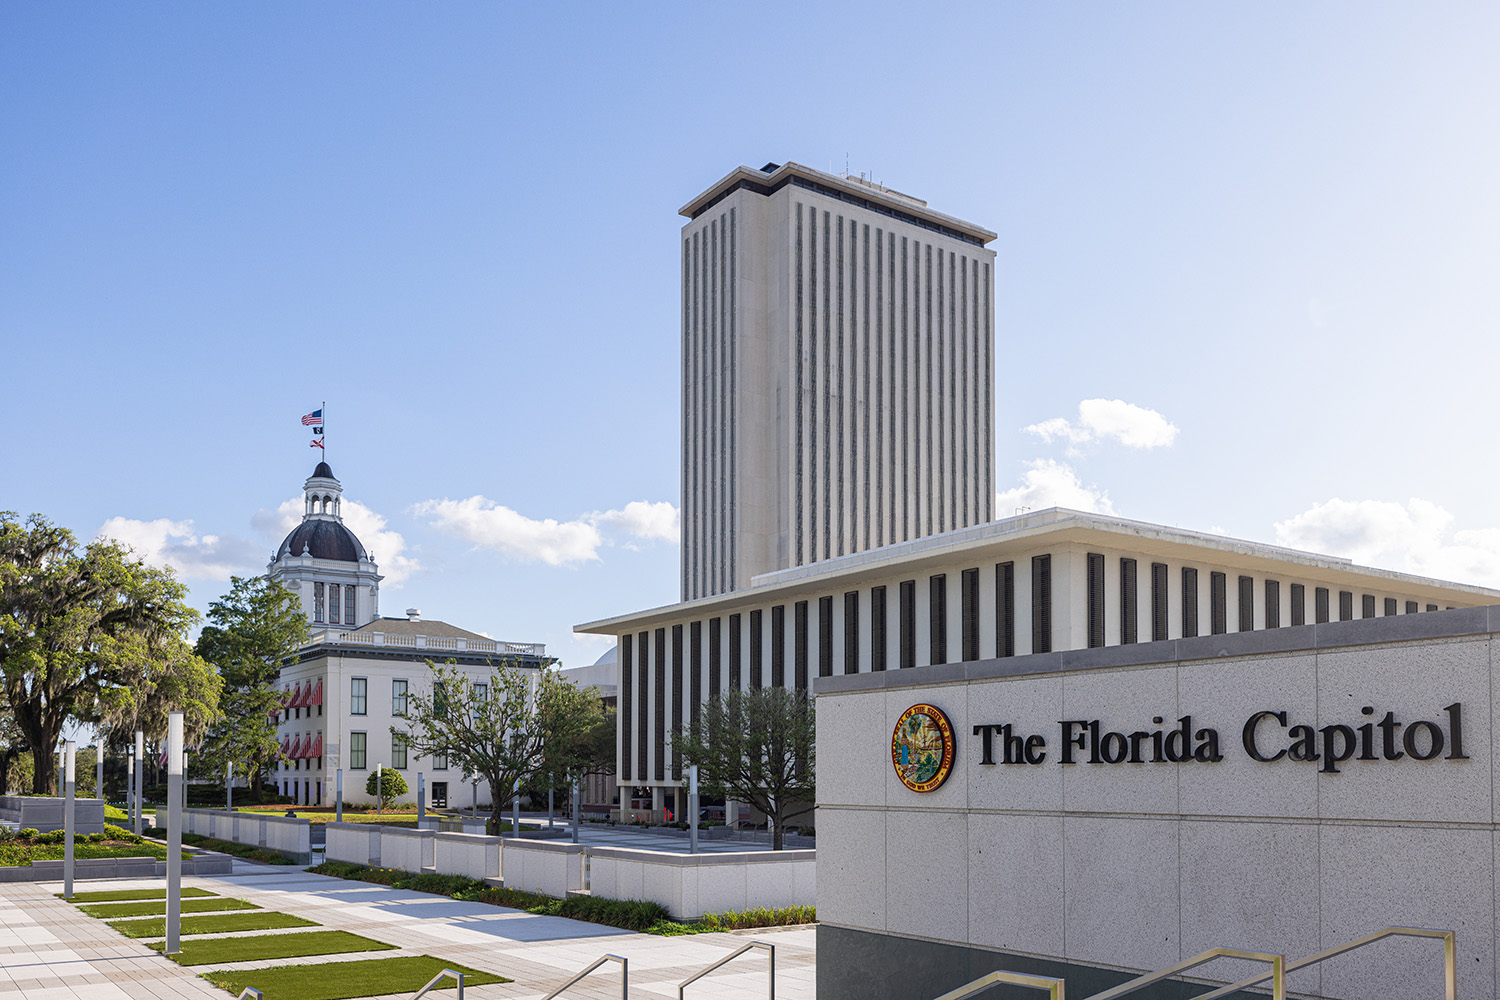 The Florida Capitol complex in Tallahassee, featuring the modern high-rise Capitol building and the historic Old Capitol building.